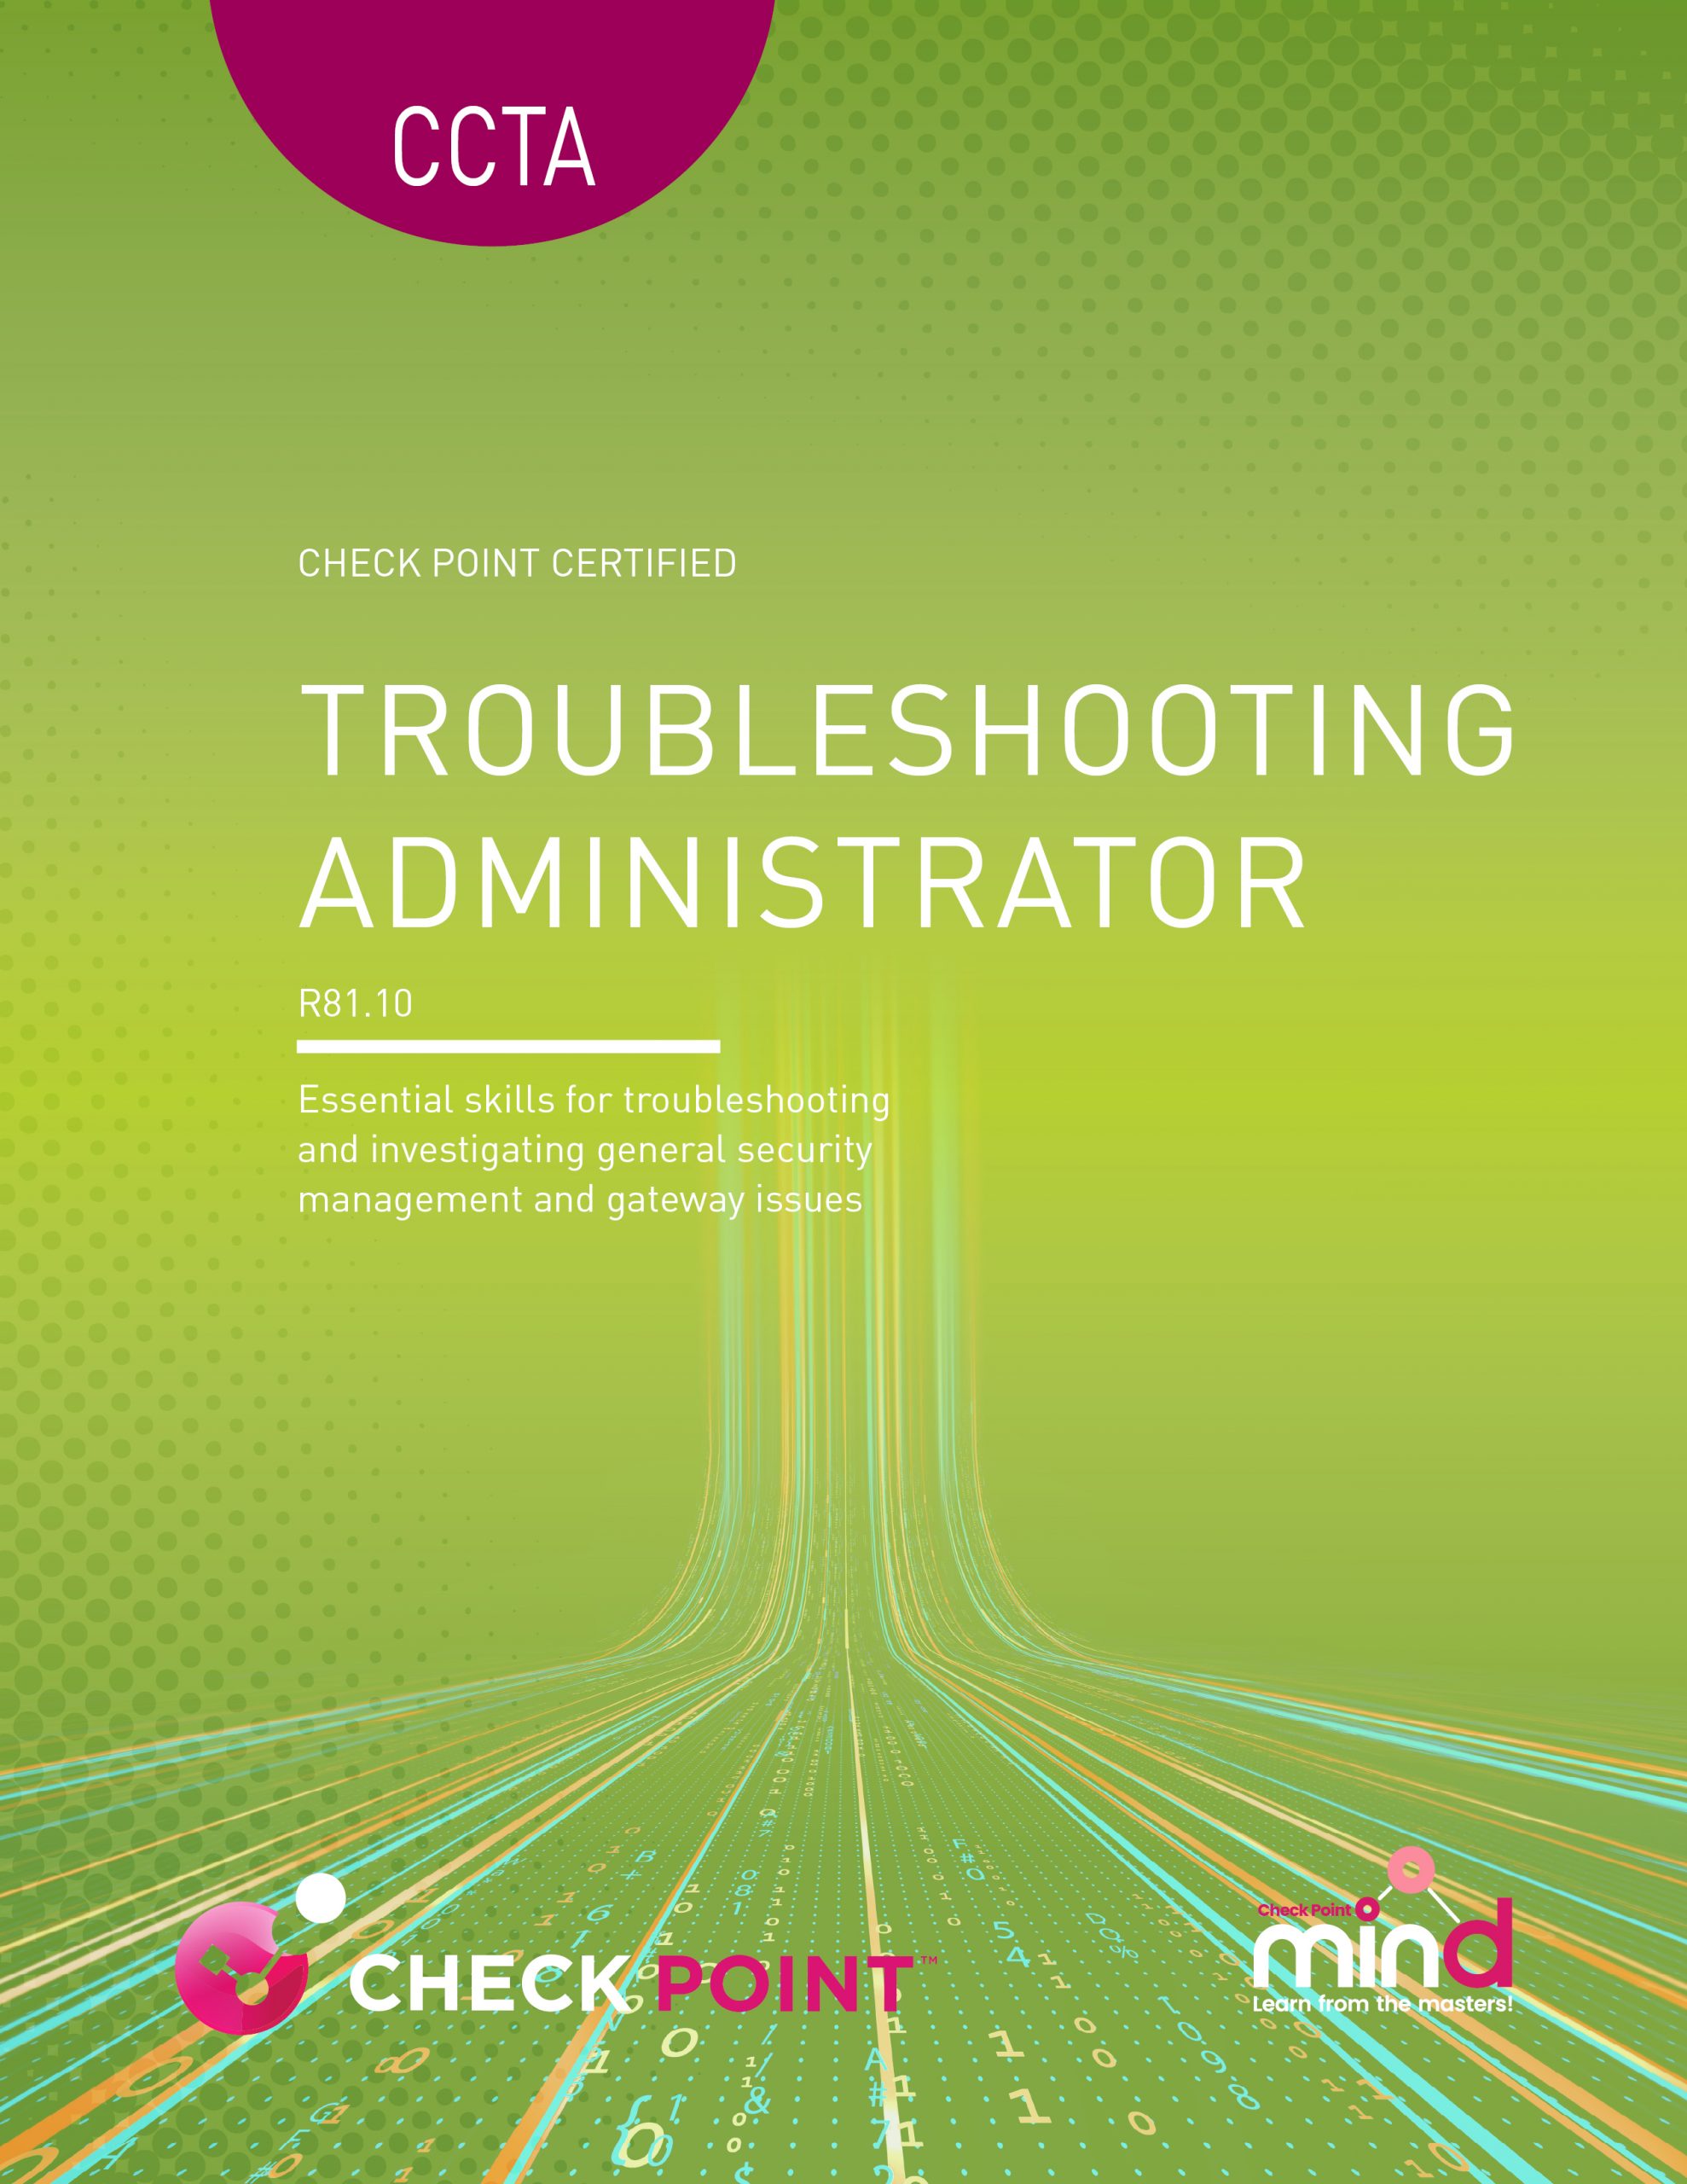 CCTA-R81.10 – Check Point Certified Troubleshooting Administrator on R81.10 (CCTA)